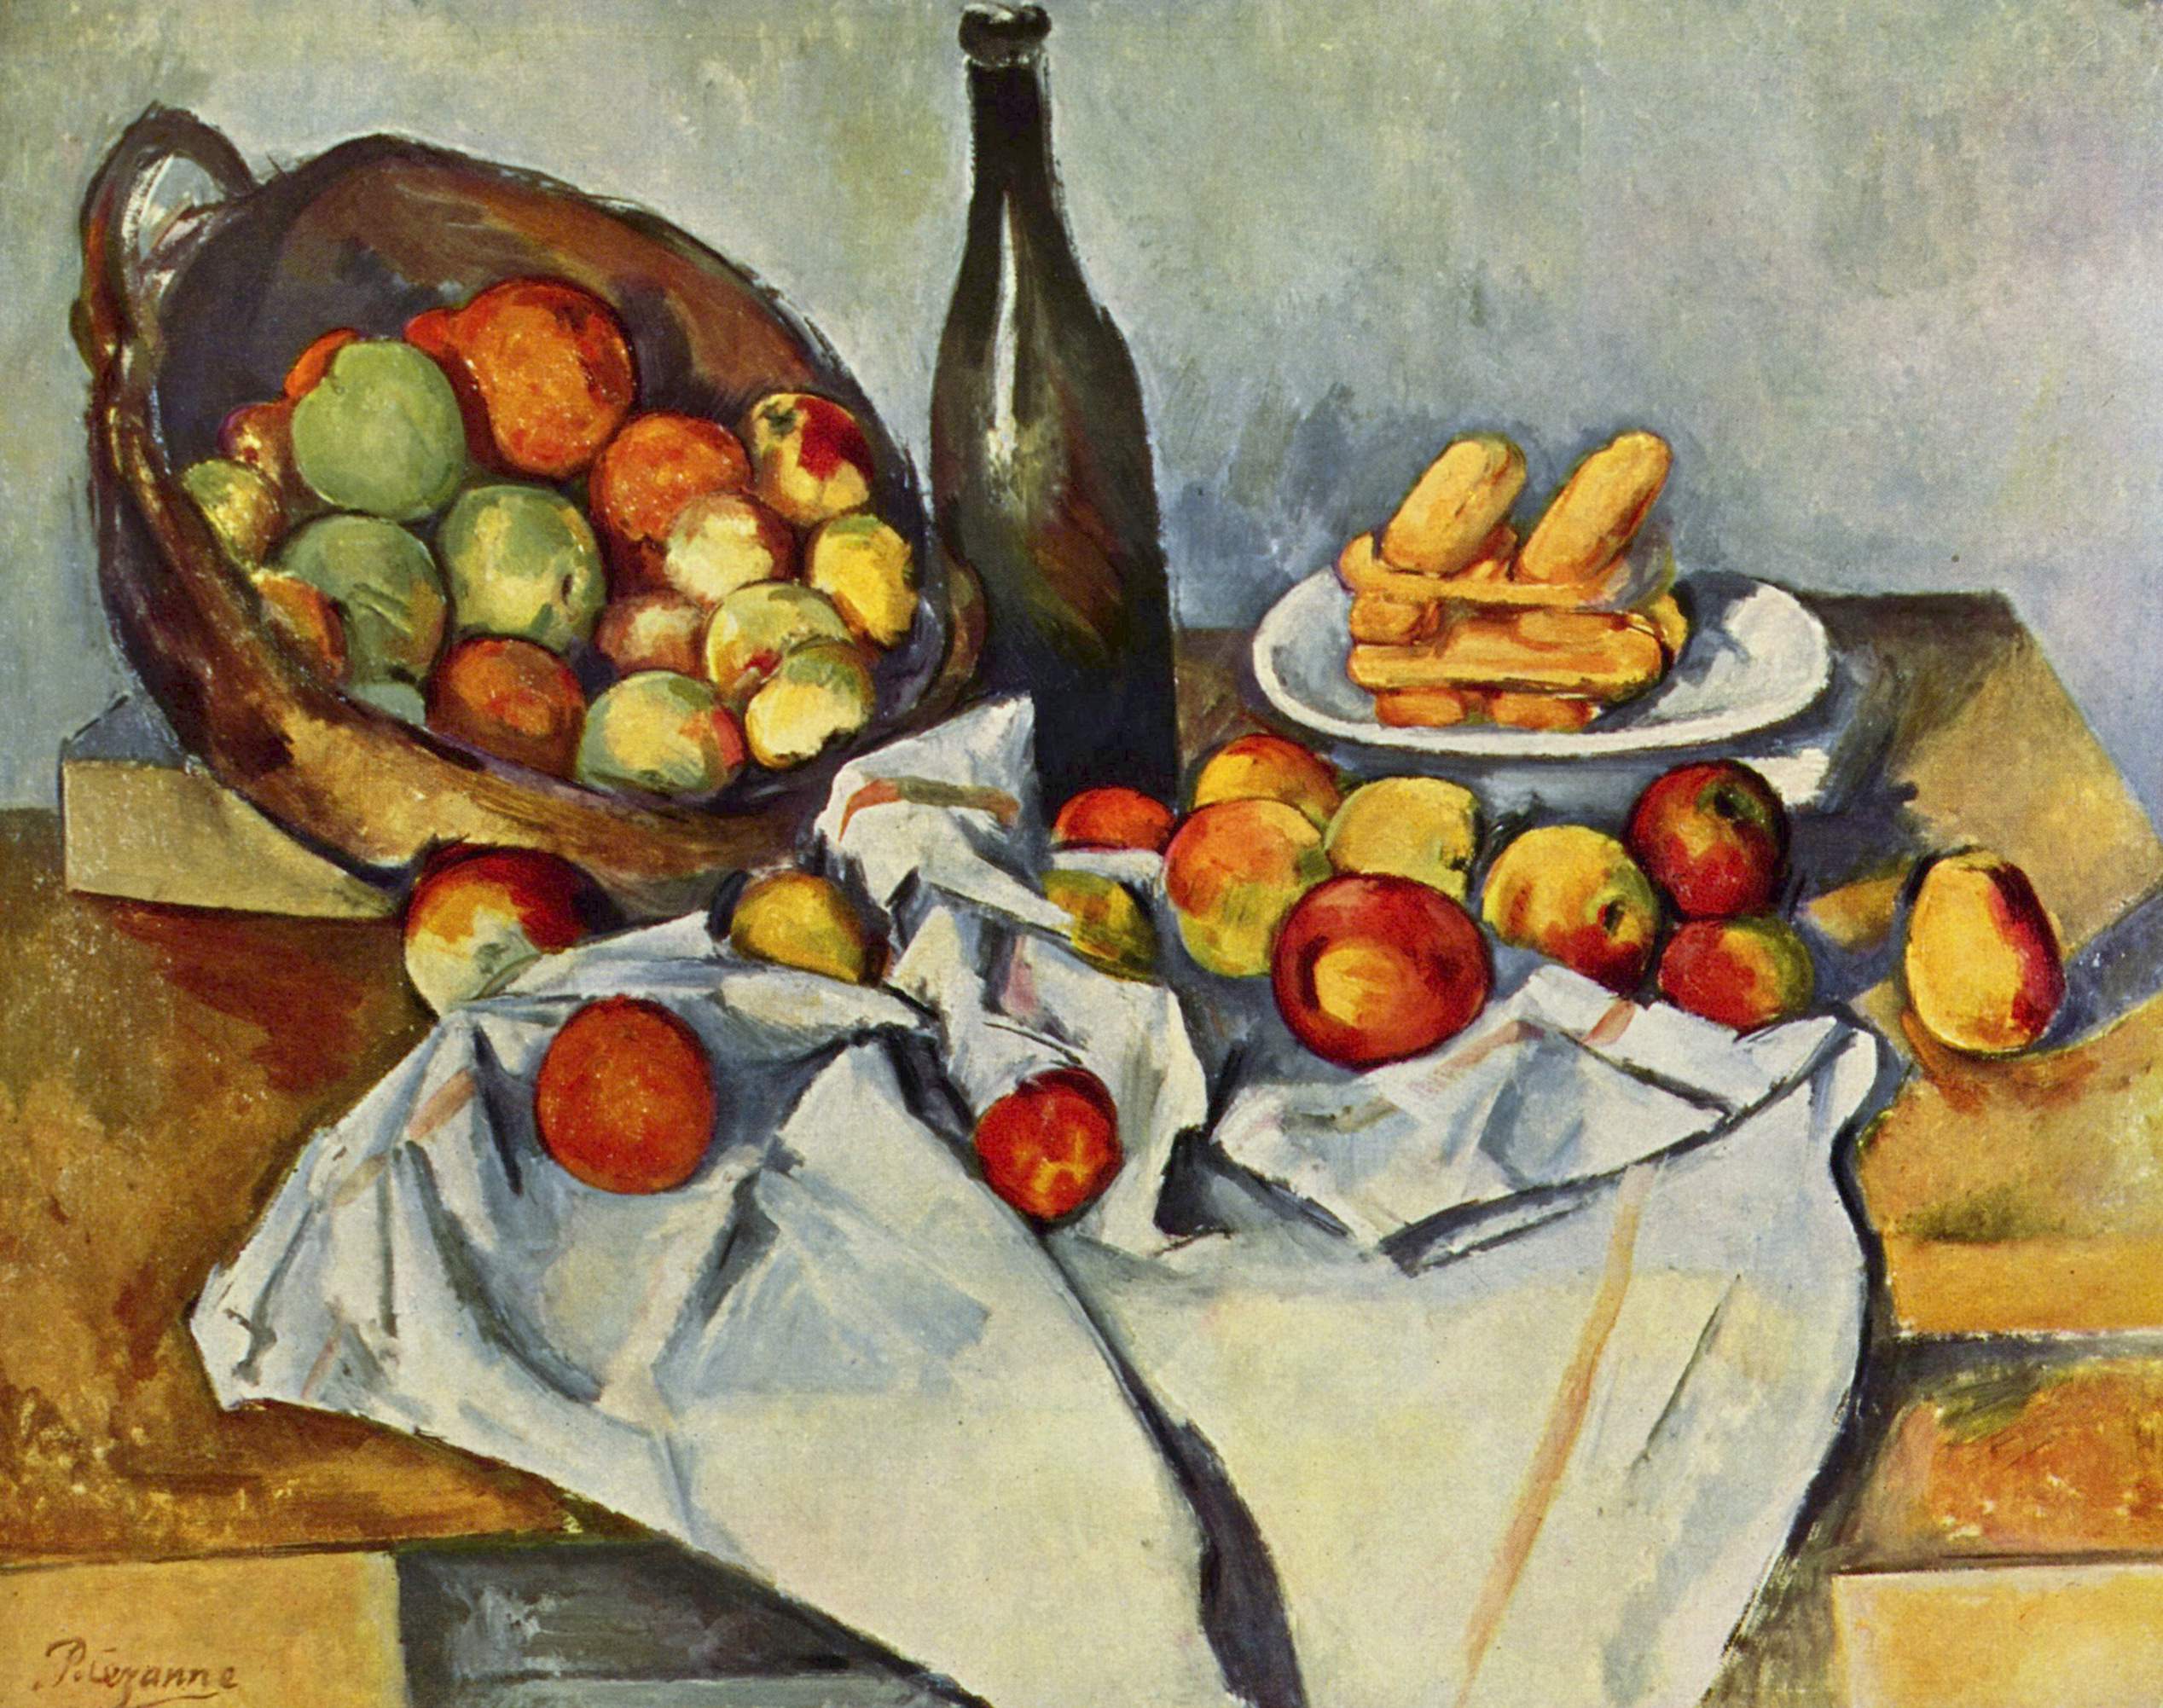 https://uploads0.wikiart.org/images/paul-cezanne/still-life-with-bottle-and-apple-basket-1894.jpg